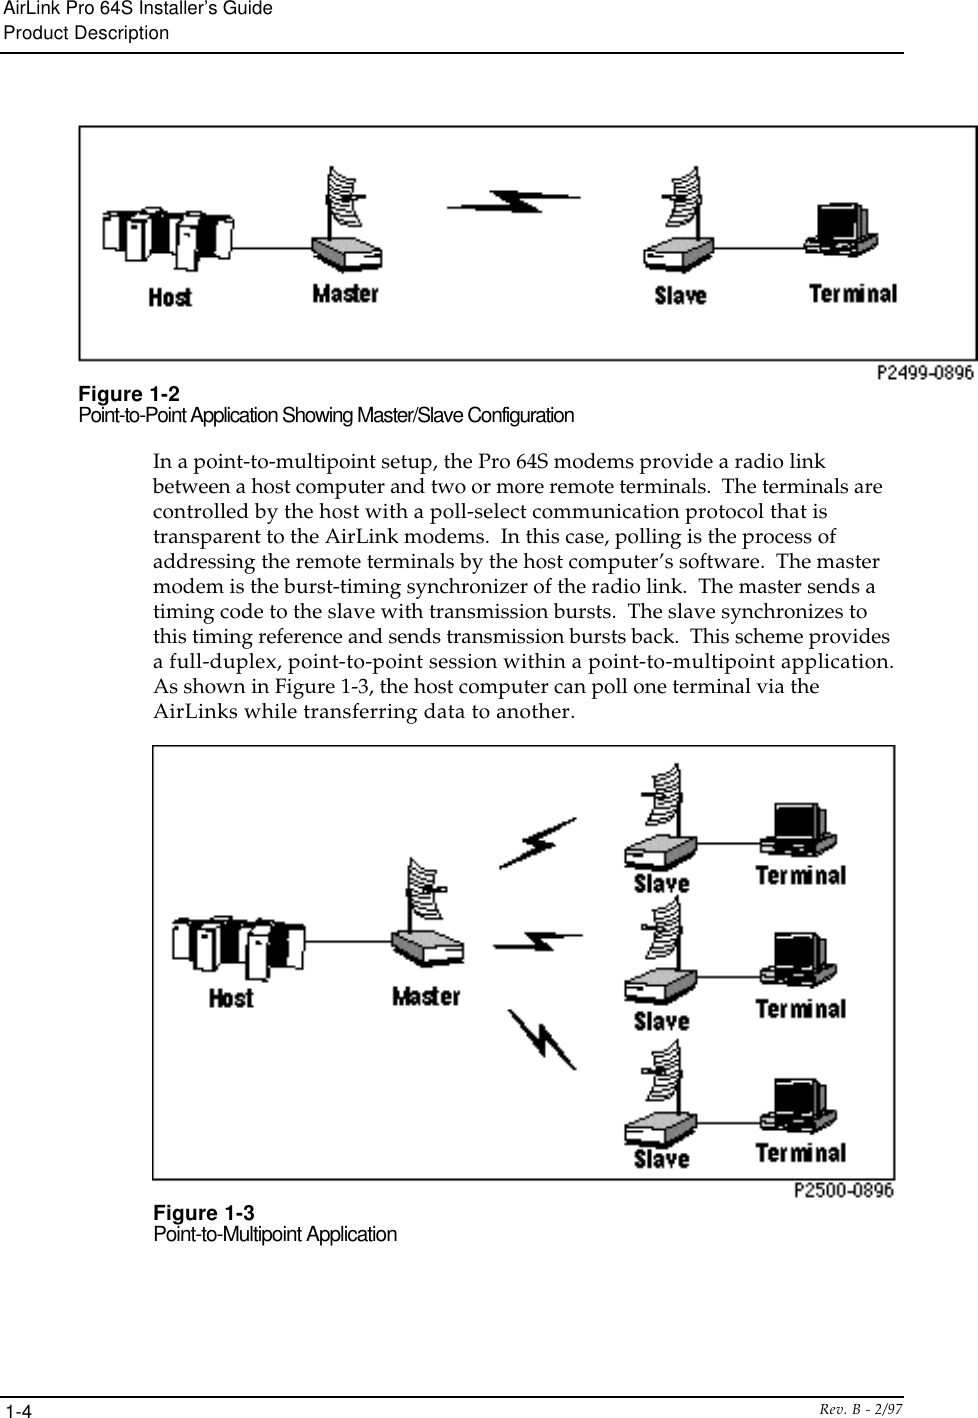 AirLink Pro 64S Installer’s GuideProduct DescriptionRev. B - 2/971-4Figure 1-2Point-to-Point Application Showing Master/Slave ConfigurationIn a point-to-multipoint setup, the Pro 64S modems provide a radio linkbetween a host computer and two or more remote terminals.  The terminals arecontrolled by the host with a poll-select communication protocol that istransparent to the AirLink modems.  In this case, polling is the process ofaddressing the remote terminals by the host computer’s software.  The mastermodem is the burst-timing synchronizer of the radio link.  The master sends atiming code to the slave with transmission bursts.  The slave synchronizes tothis timing reference and sends transmission bursts back.  This scheme providesa full-duplex, point-to-point session within a point-to-multipoint application.As shown in Figure 1-3, the host computer can poll one terminal via theAirLinks while transferring data to another.Figure 1-3Point-to-Multipoint Application